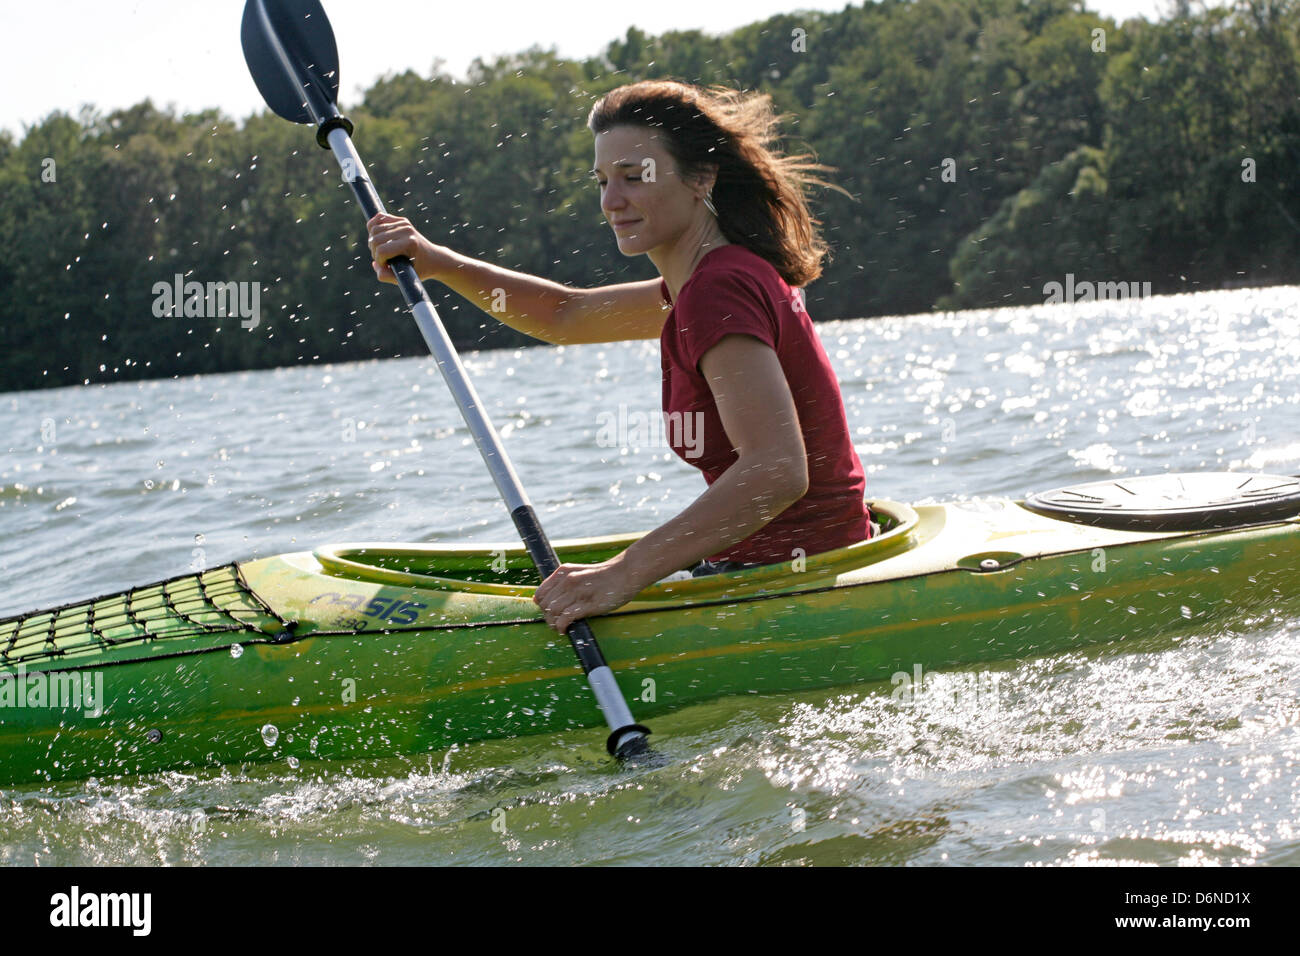 Ploen, Germany, a young woman makes a canoe trip on the Great lake Ploener Stock Photo